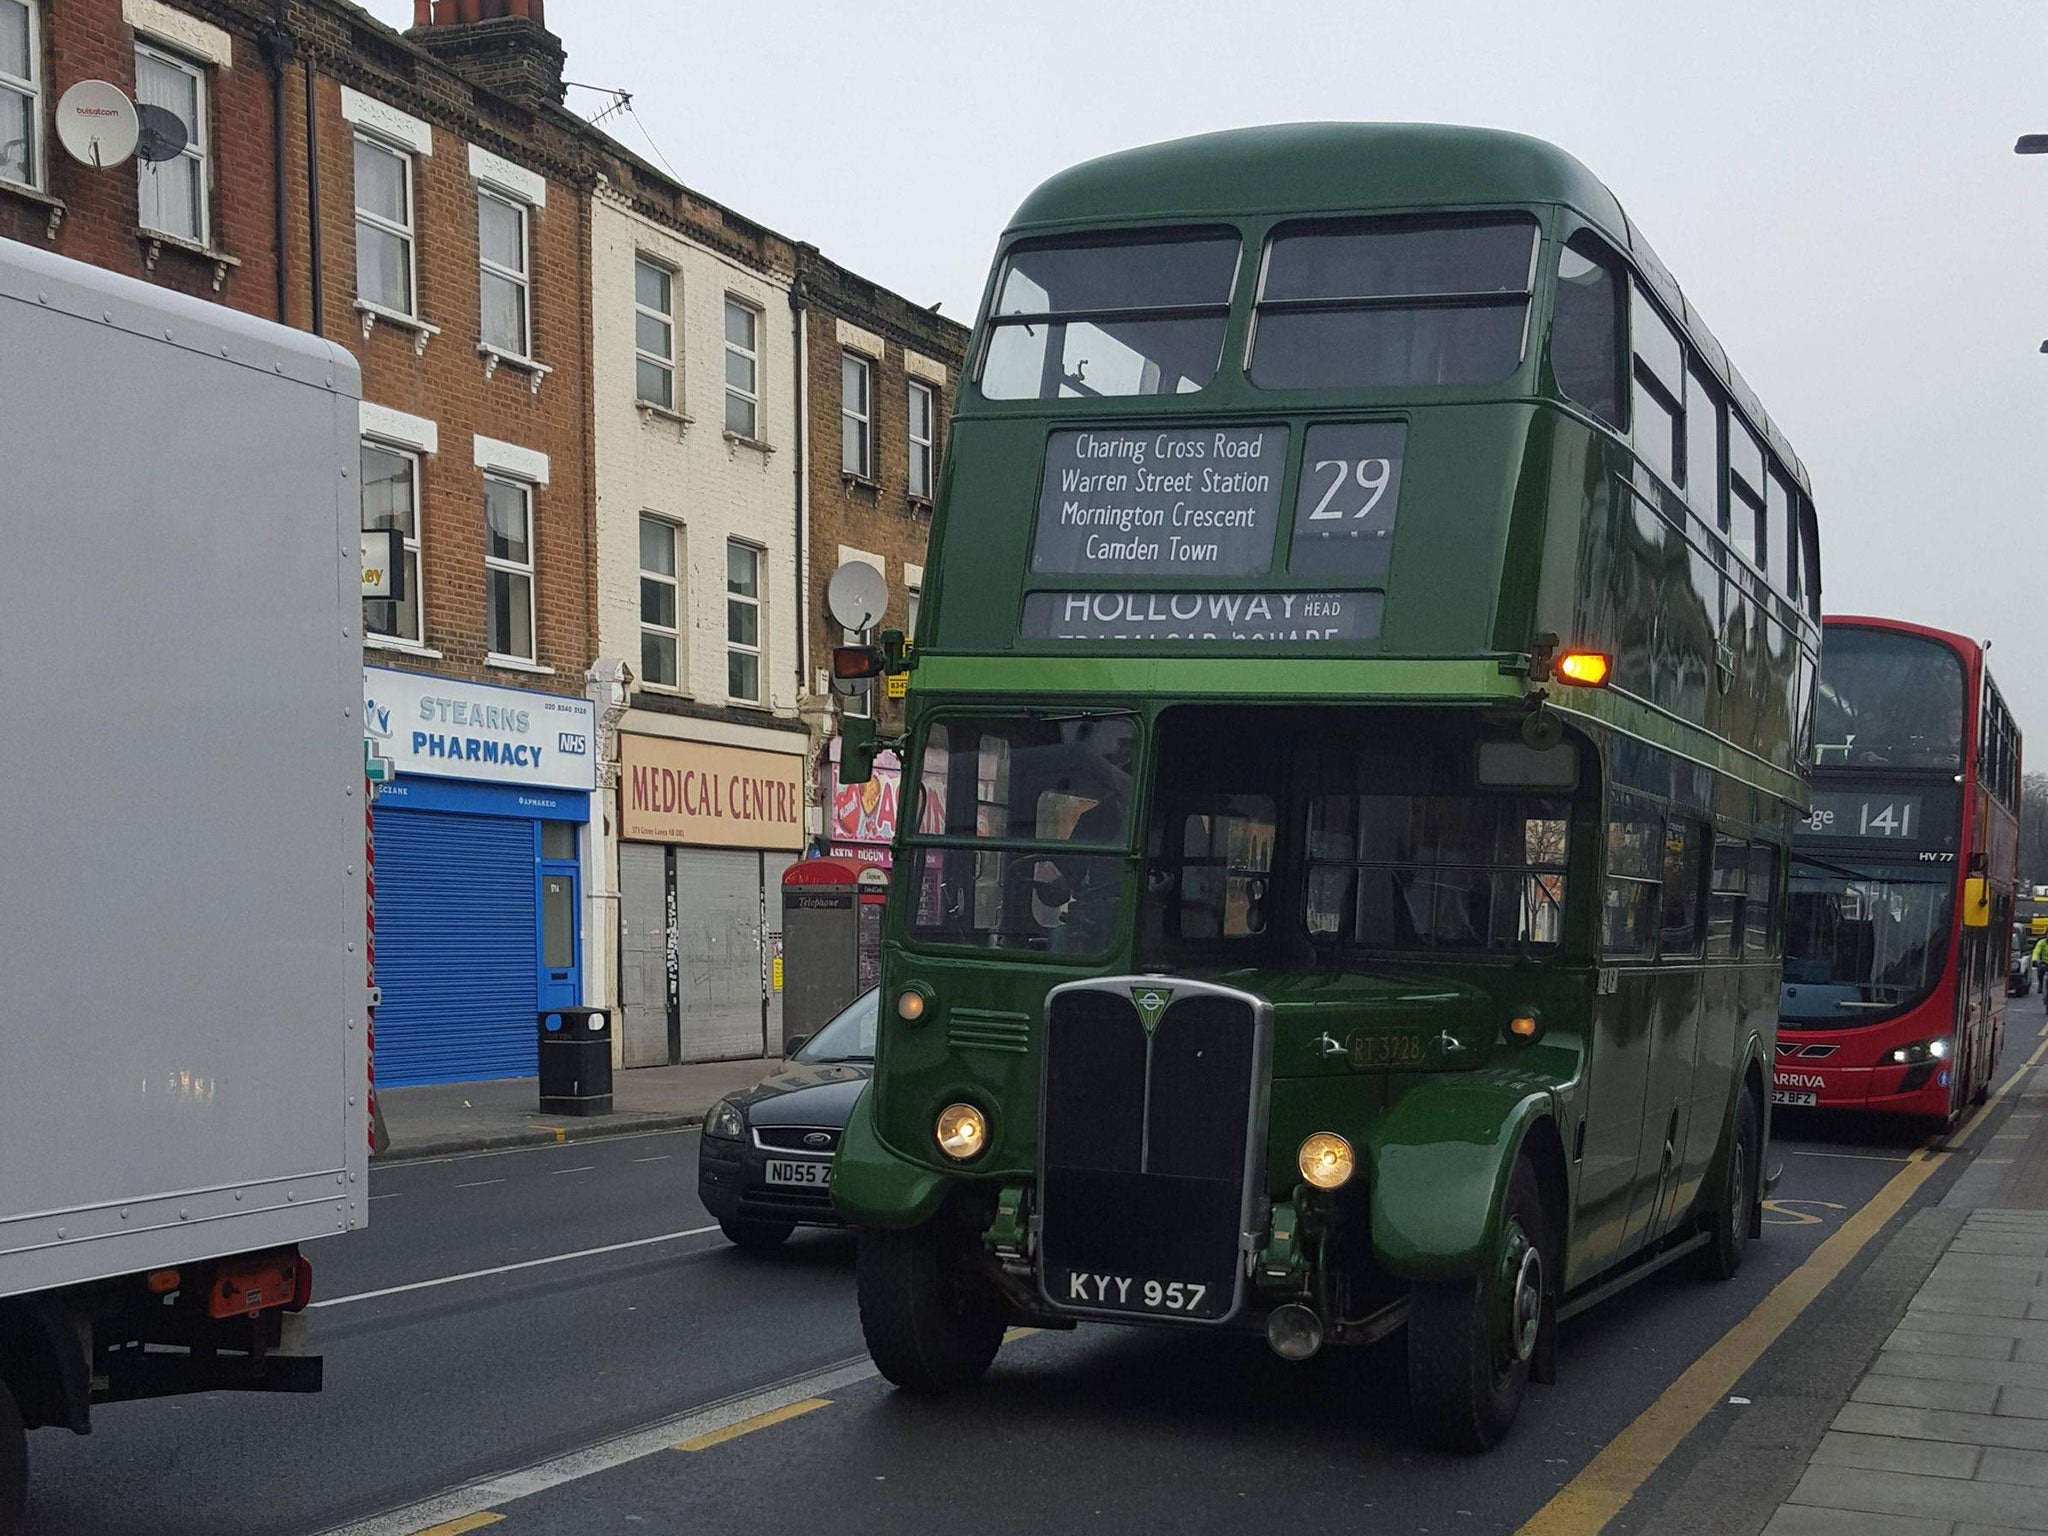 The bus was first used in the 1930s